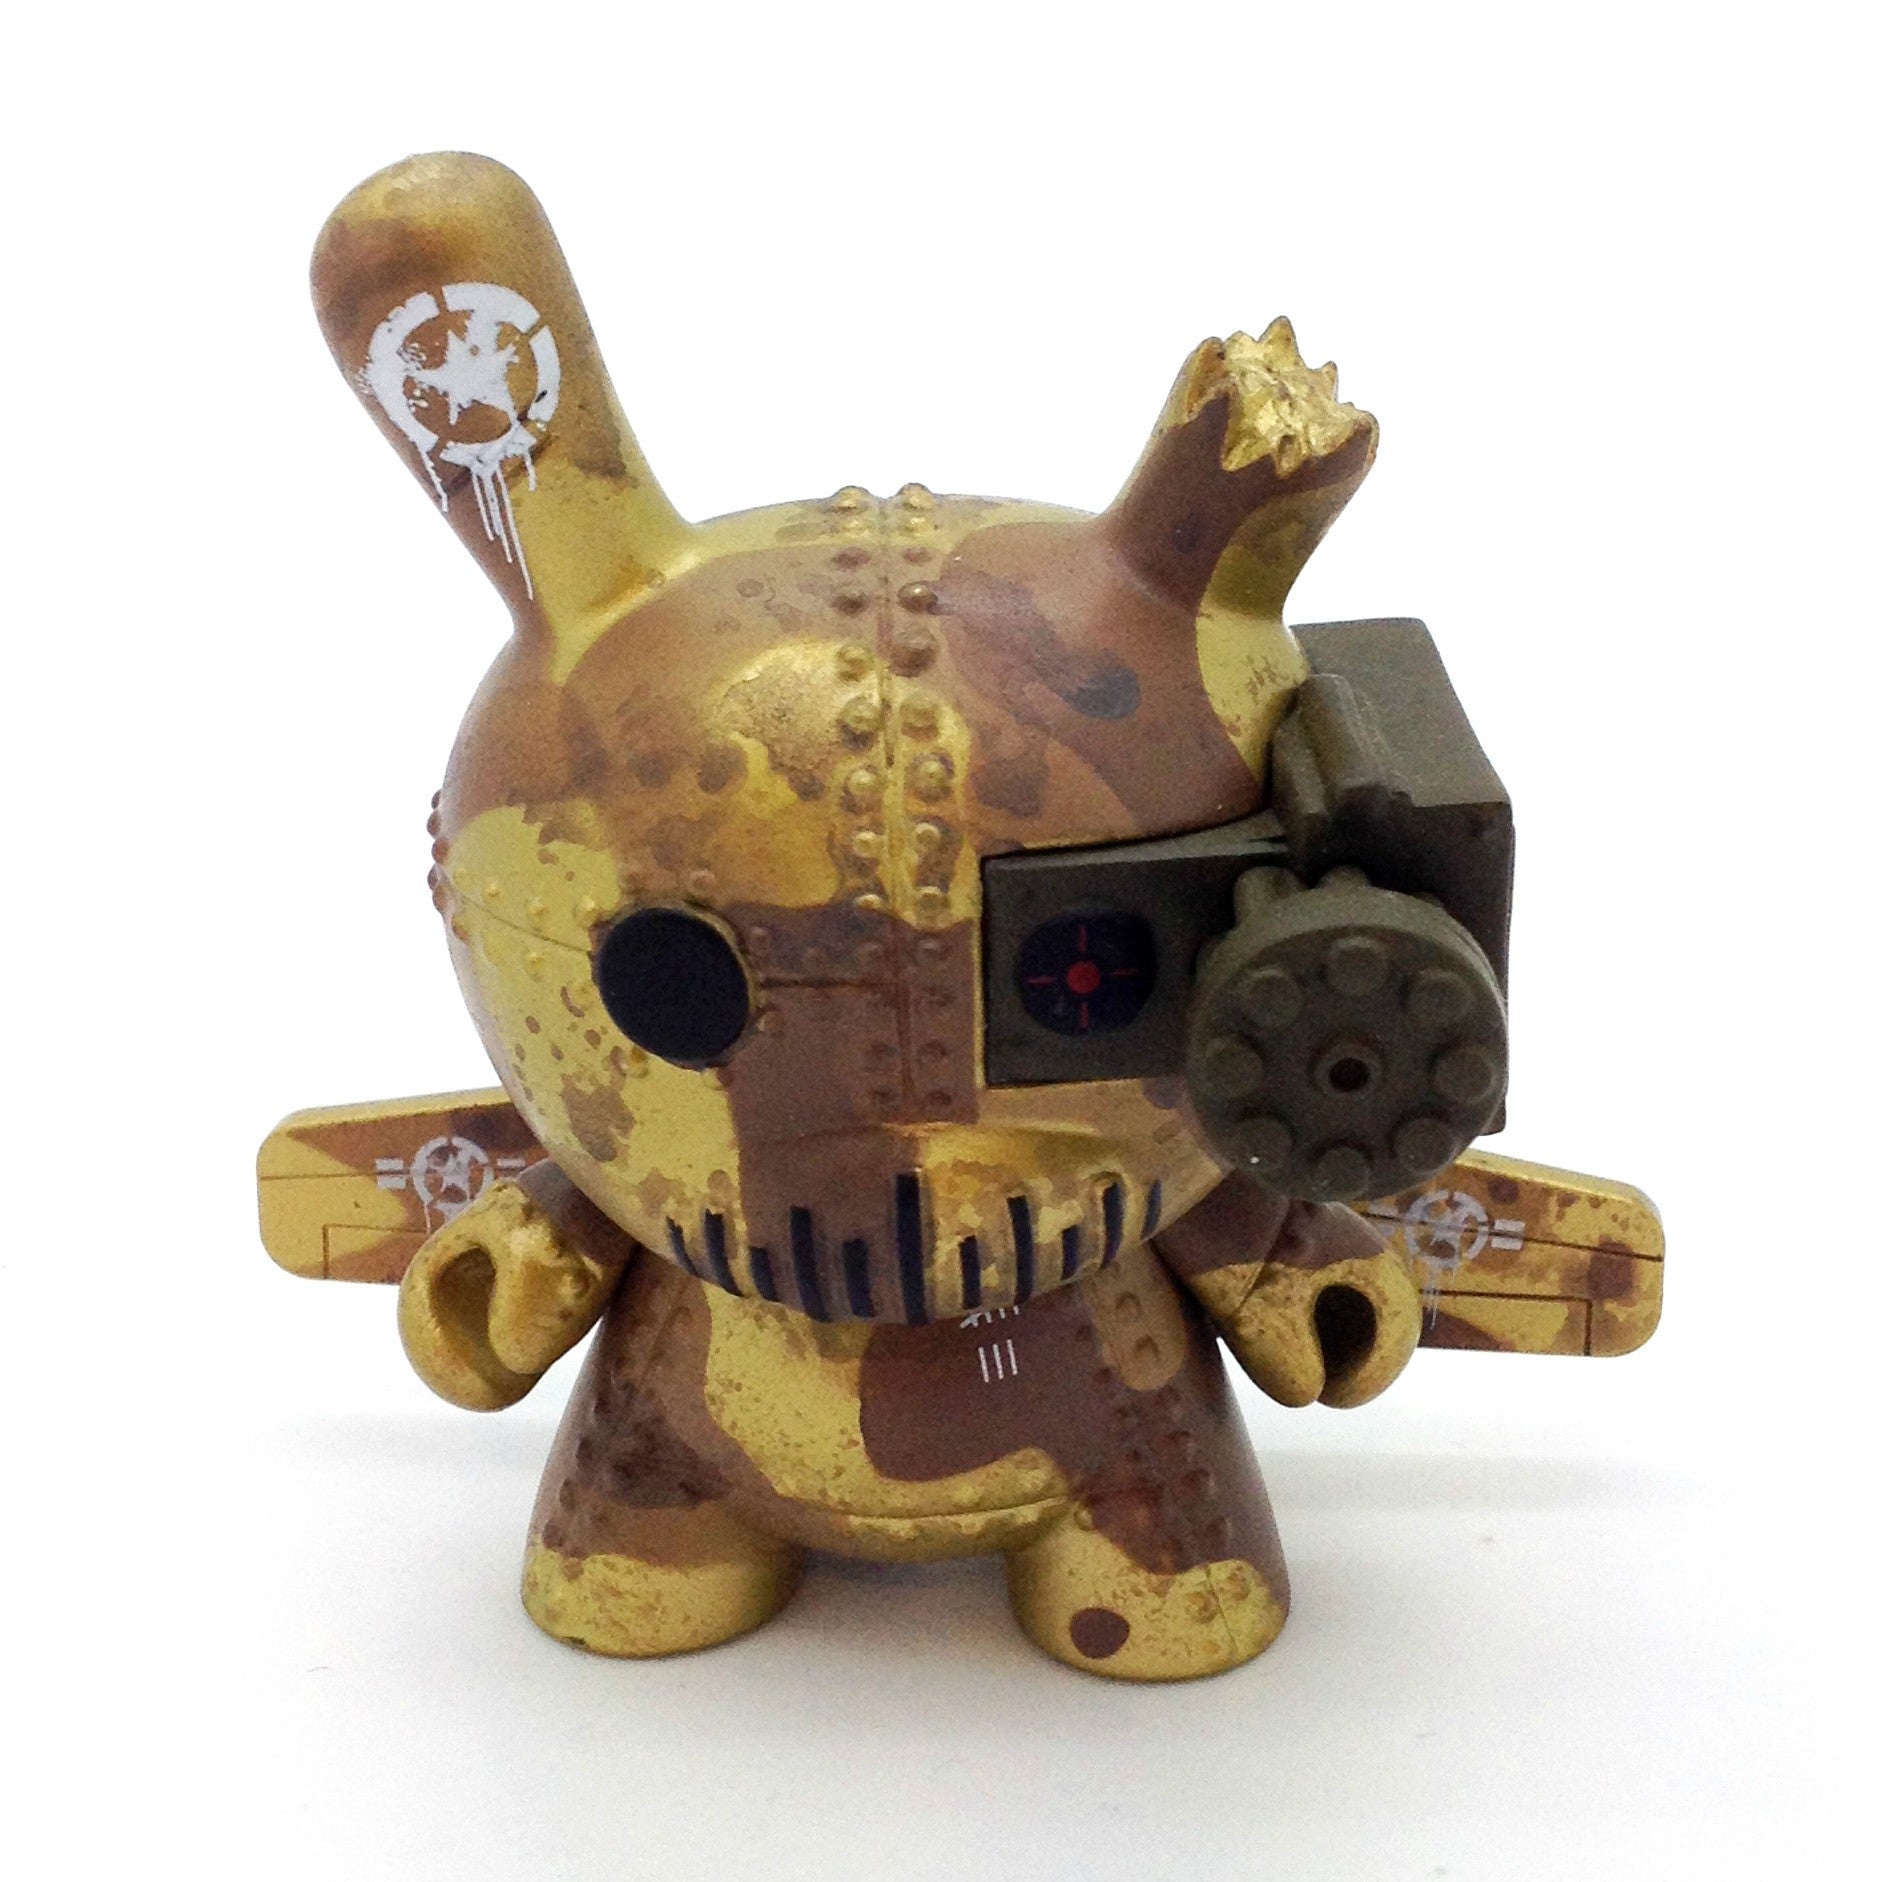 Art of War Dunny Series - Tank Destroyer by DrilOne (Case Exclusive) - Mindzai
 - 1